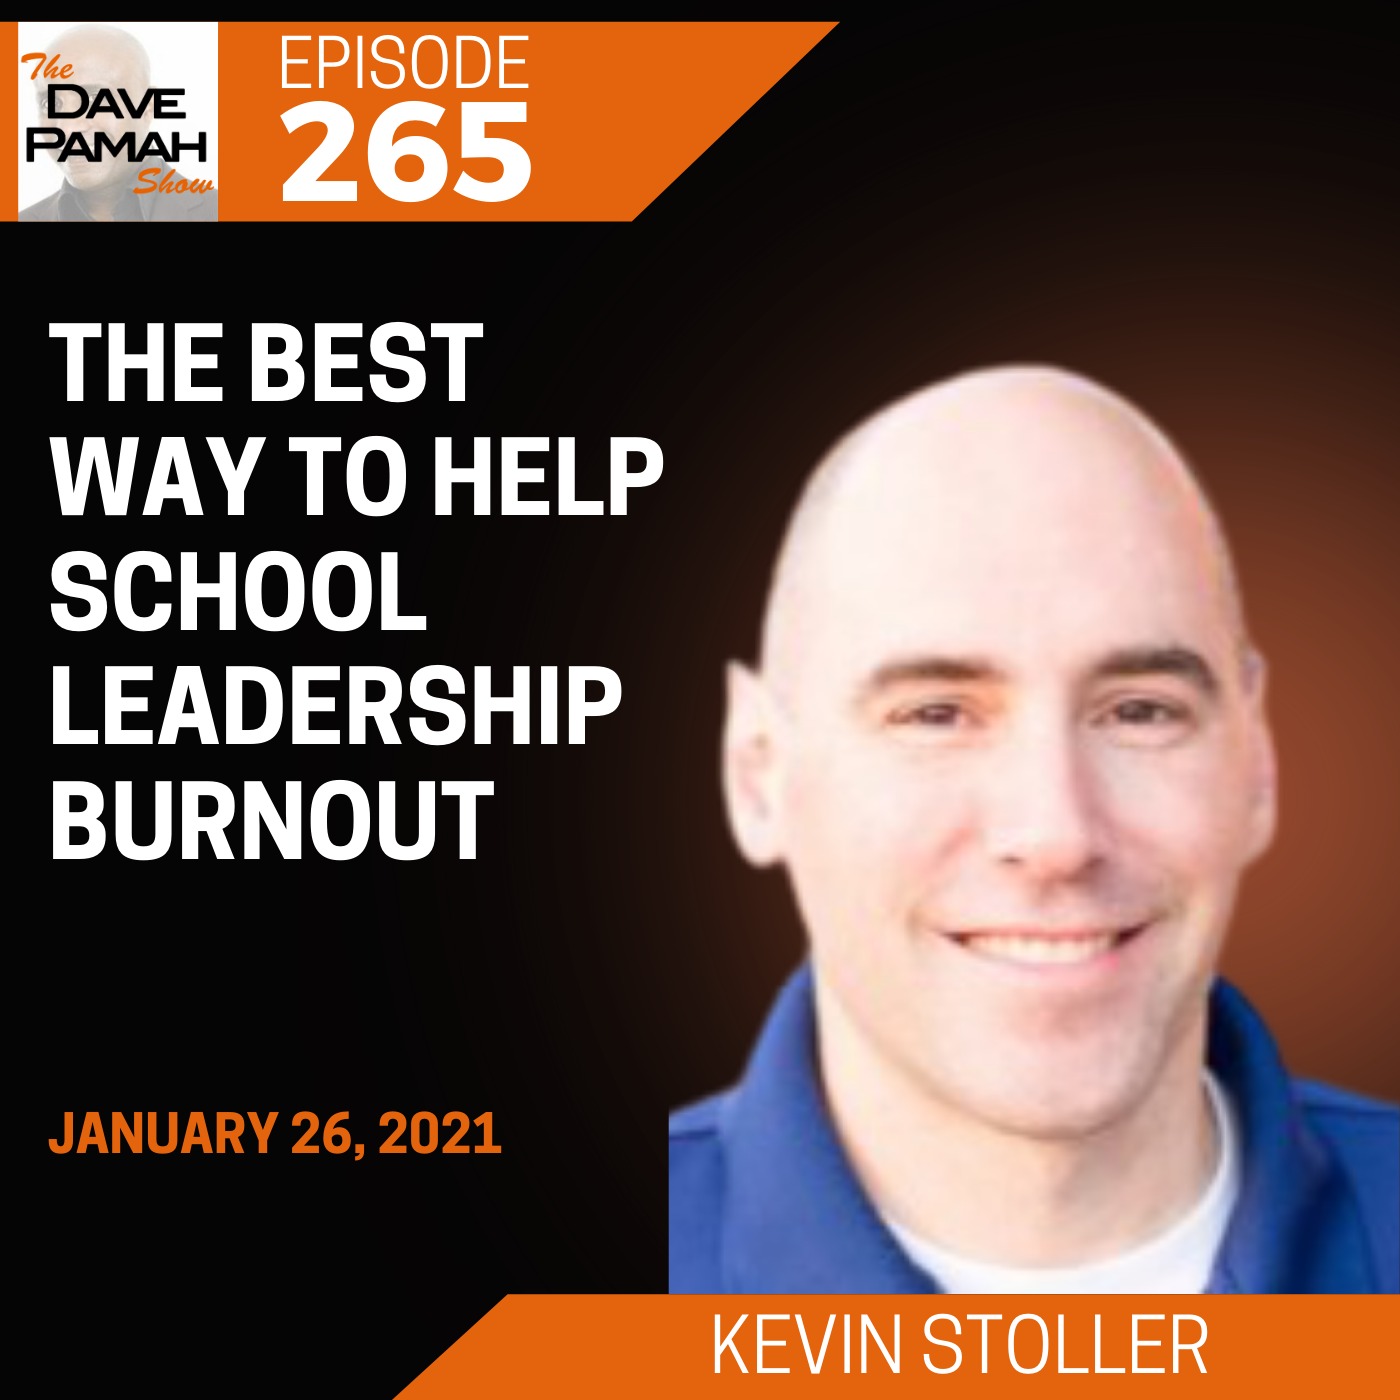 The Best Way To Help School Leadership Burnout with Kevin Stoller